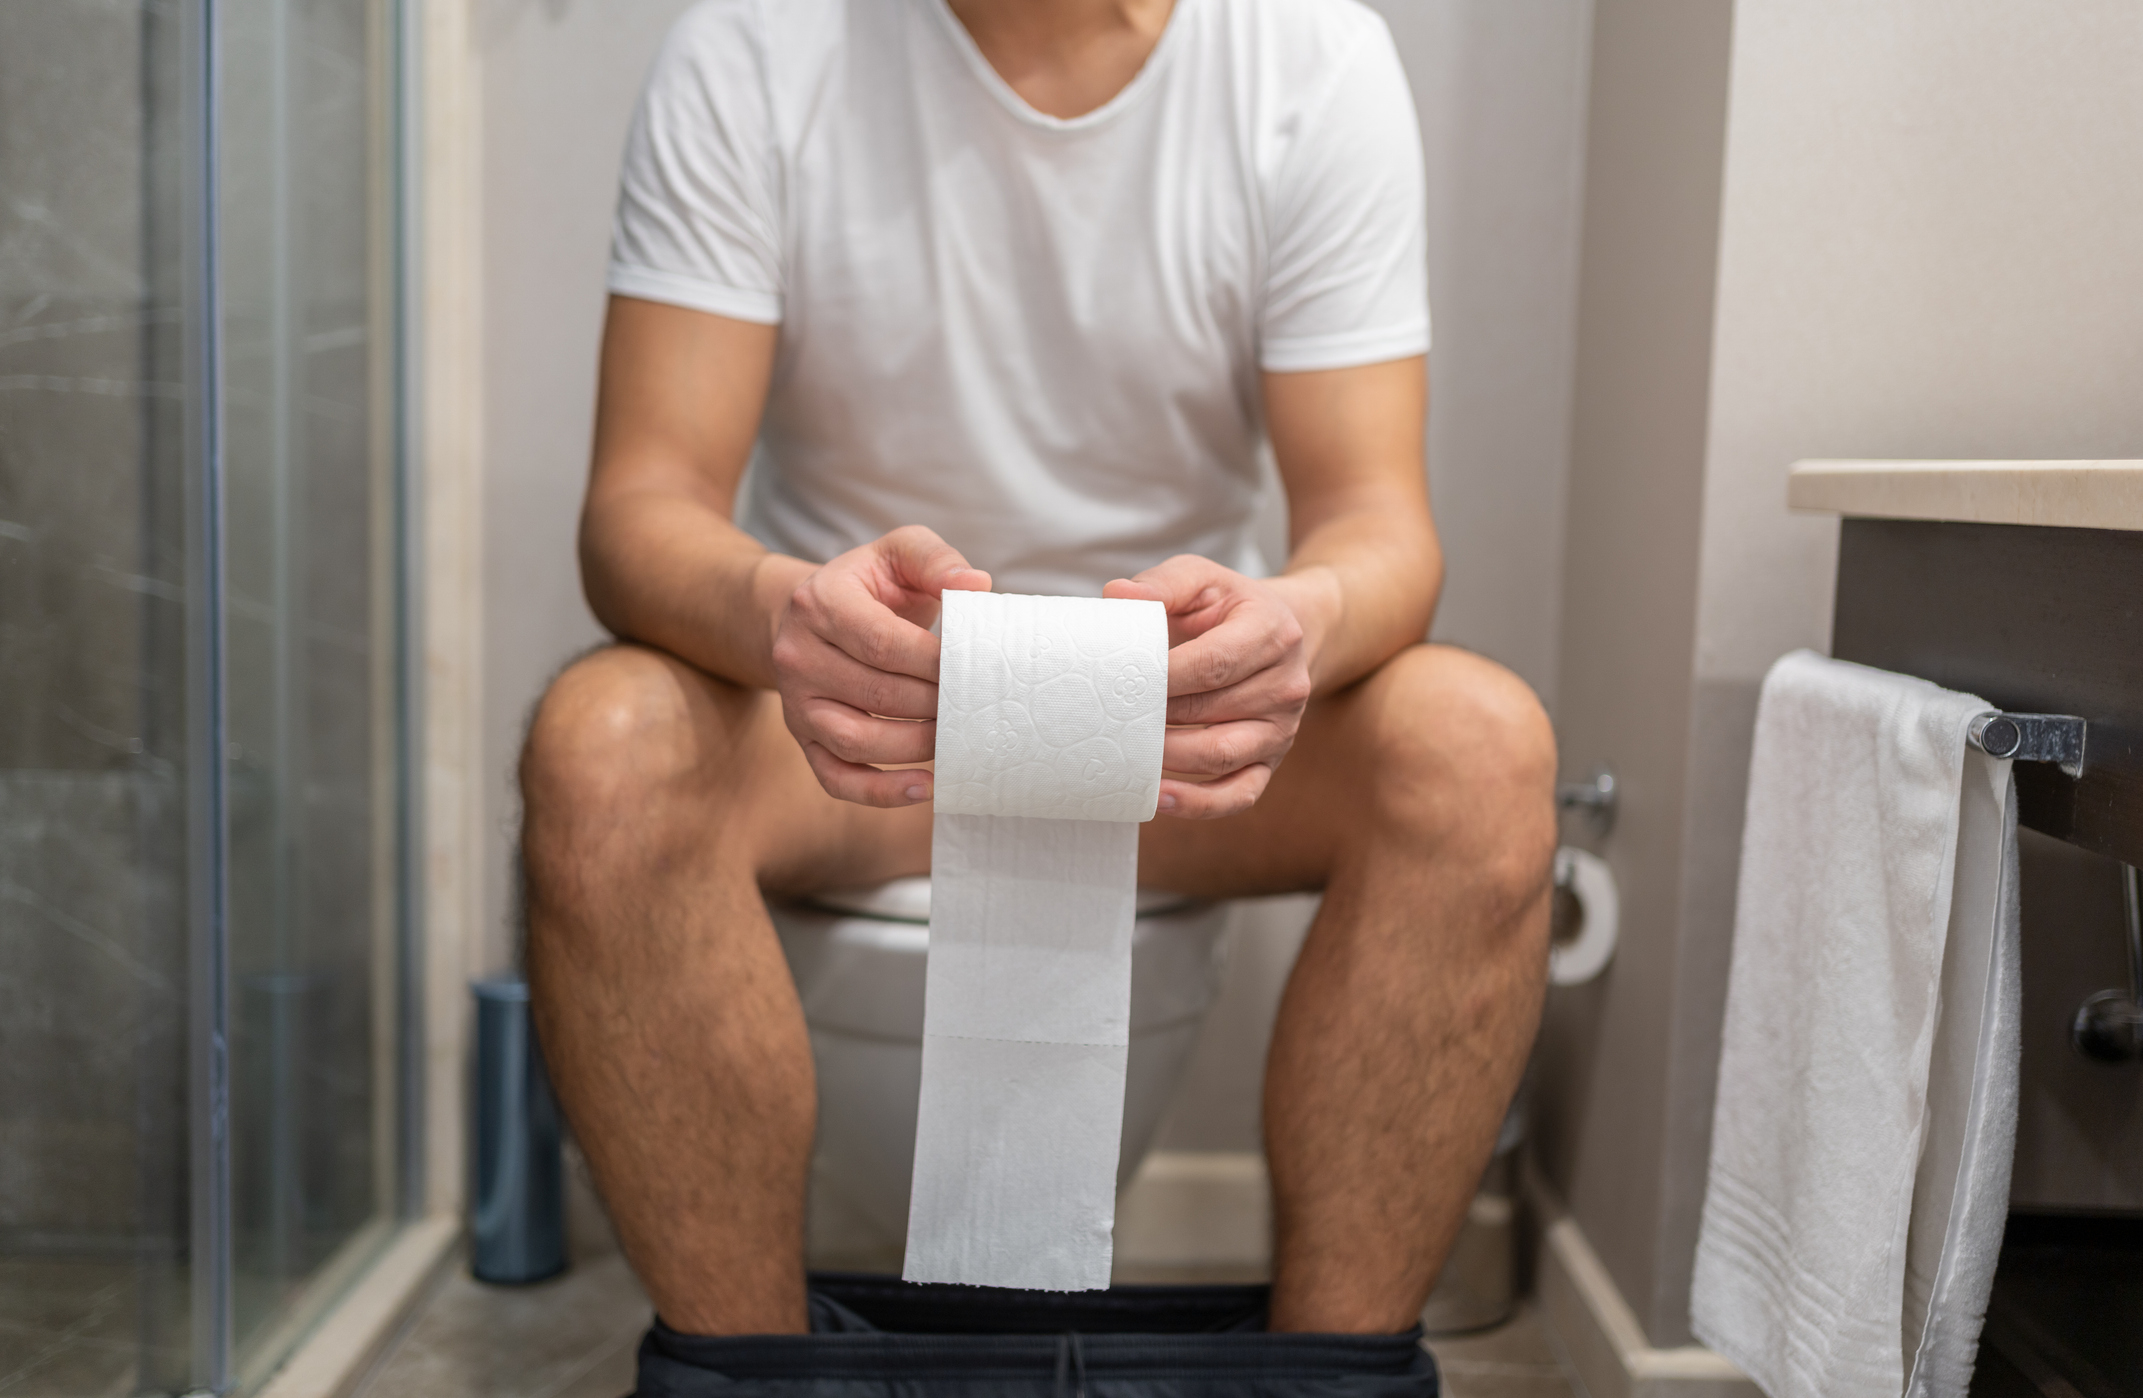 Person sitting on a toilet holding a roll of toilet paper, appearing perplexed